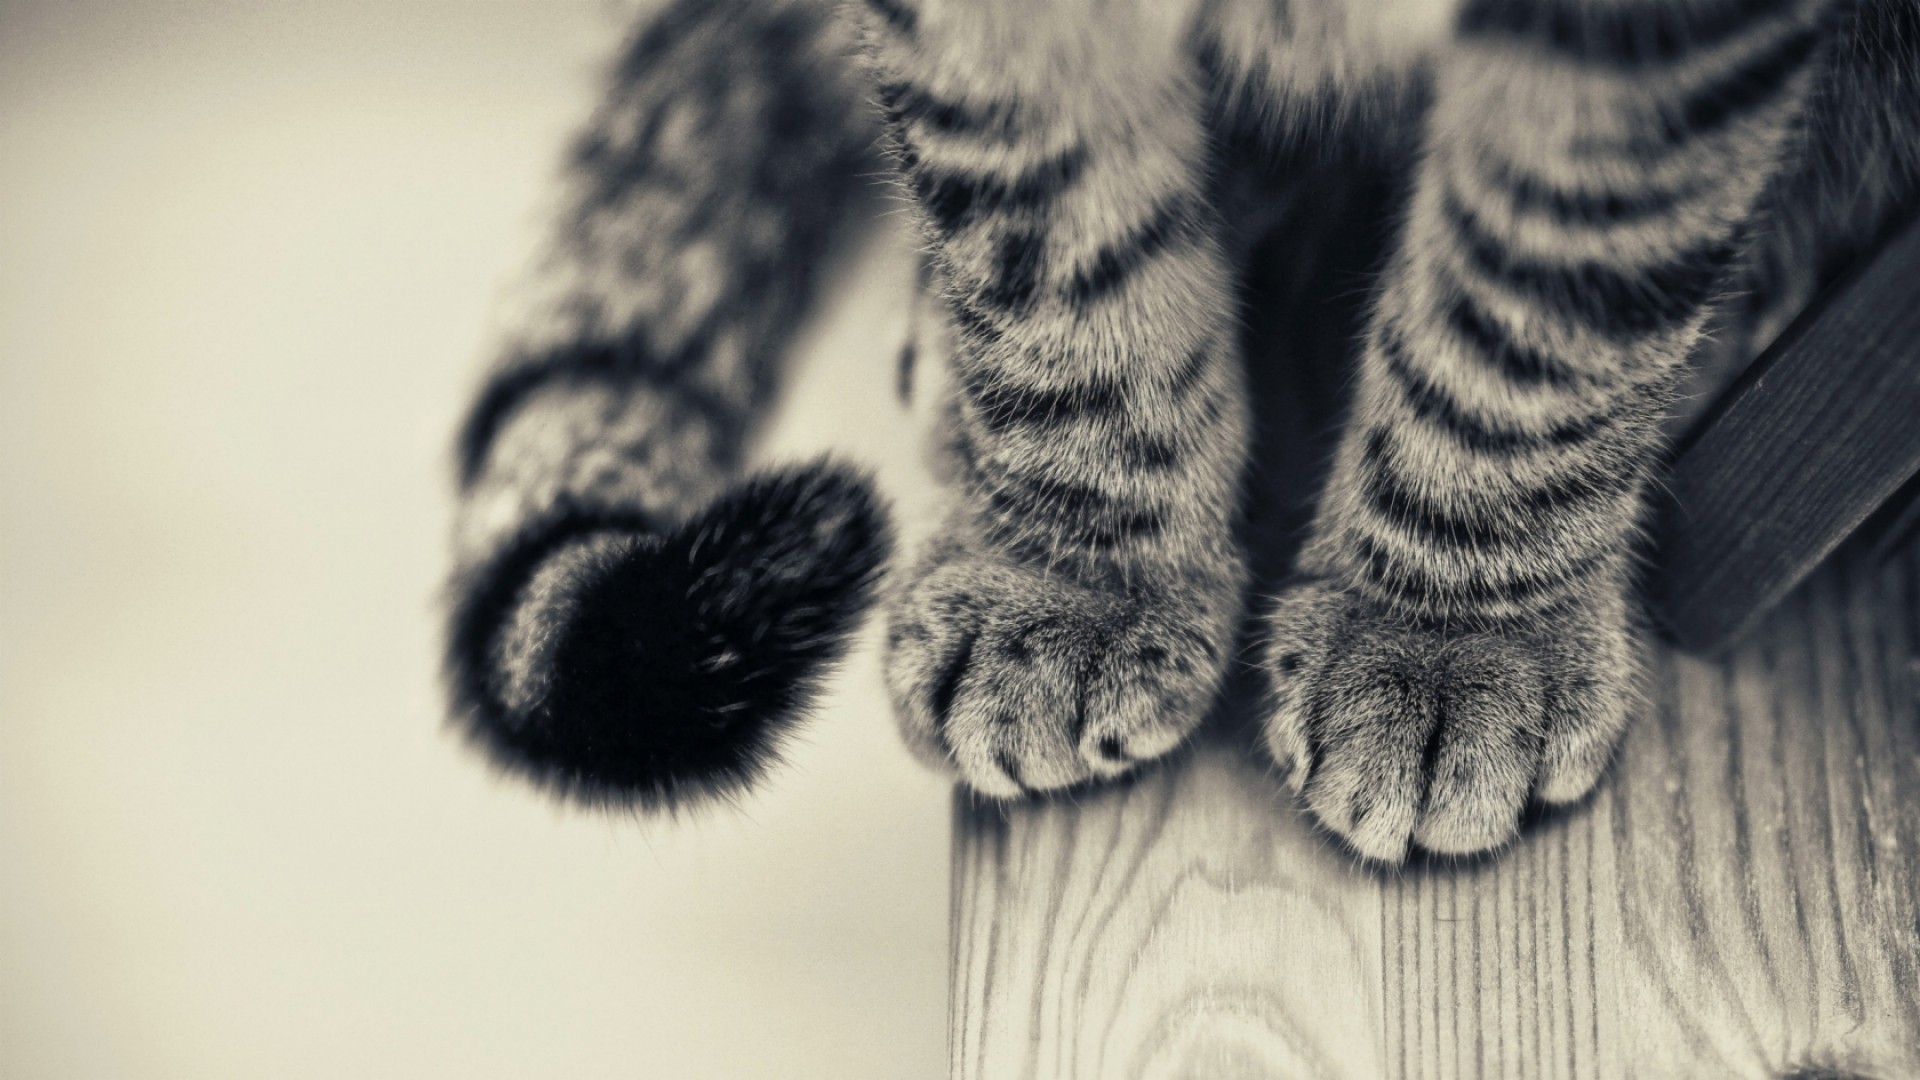 General 1920x1080 cats tail paws wooden surface monochrome animals indoors mammals